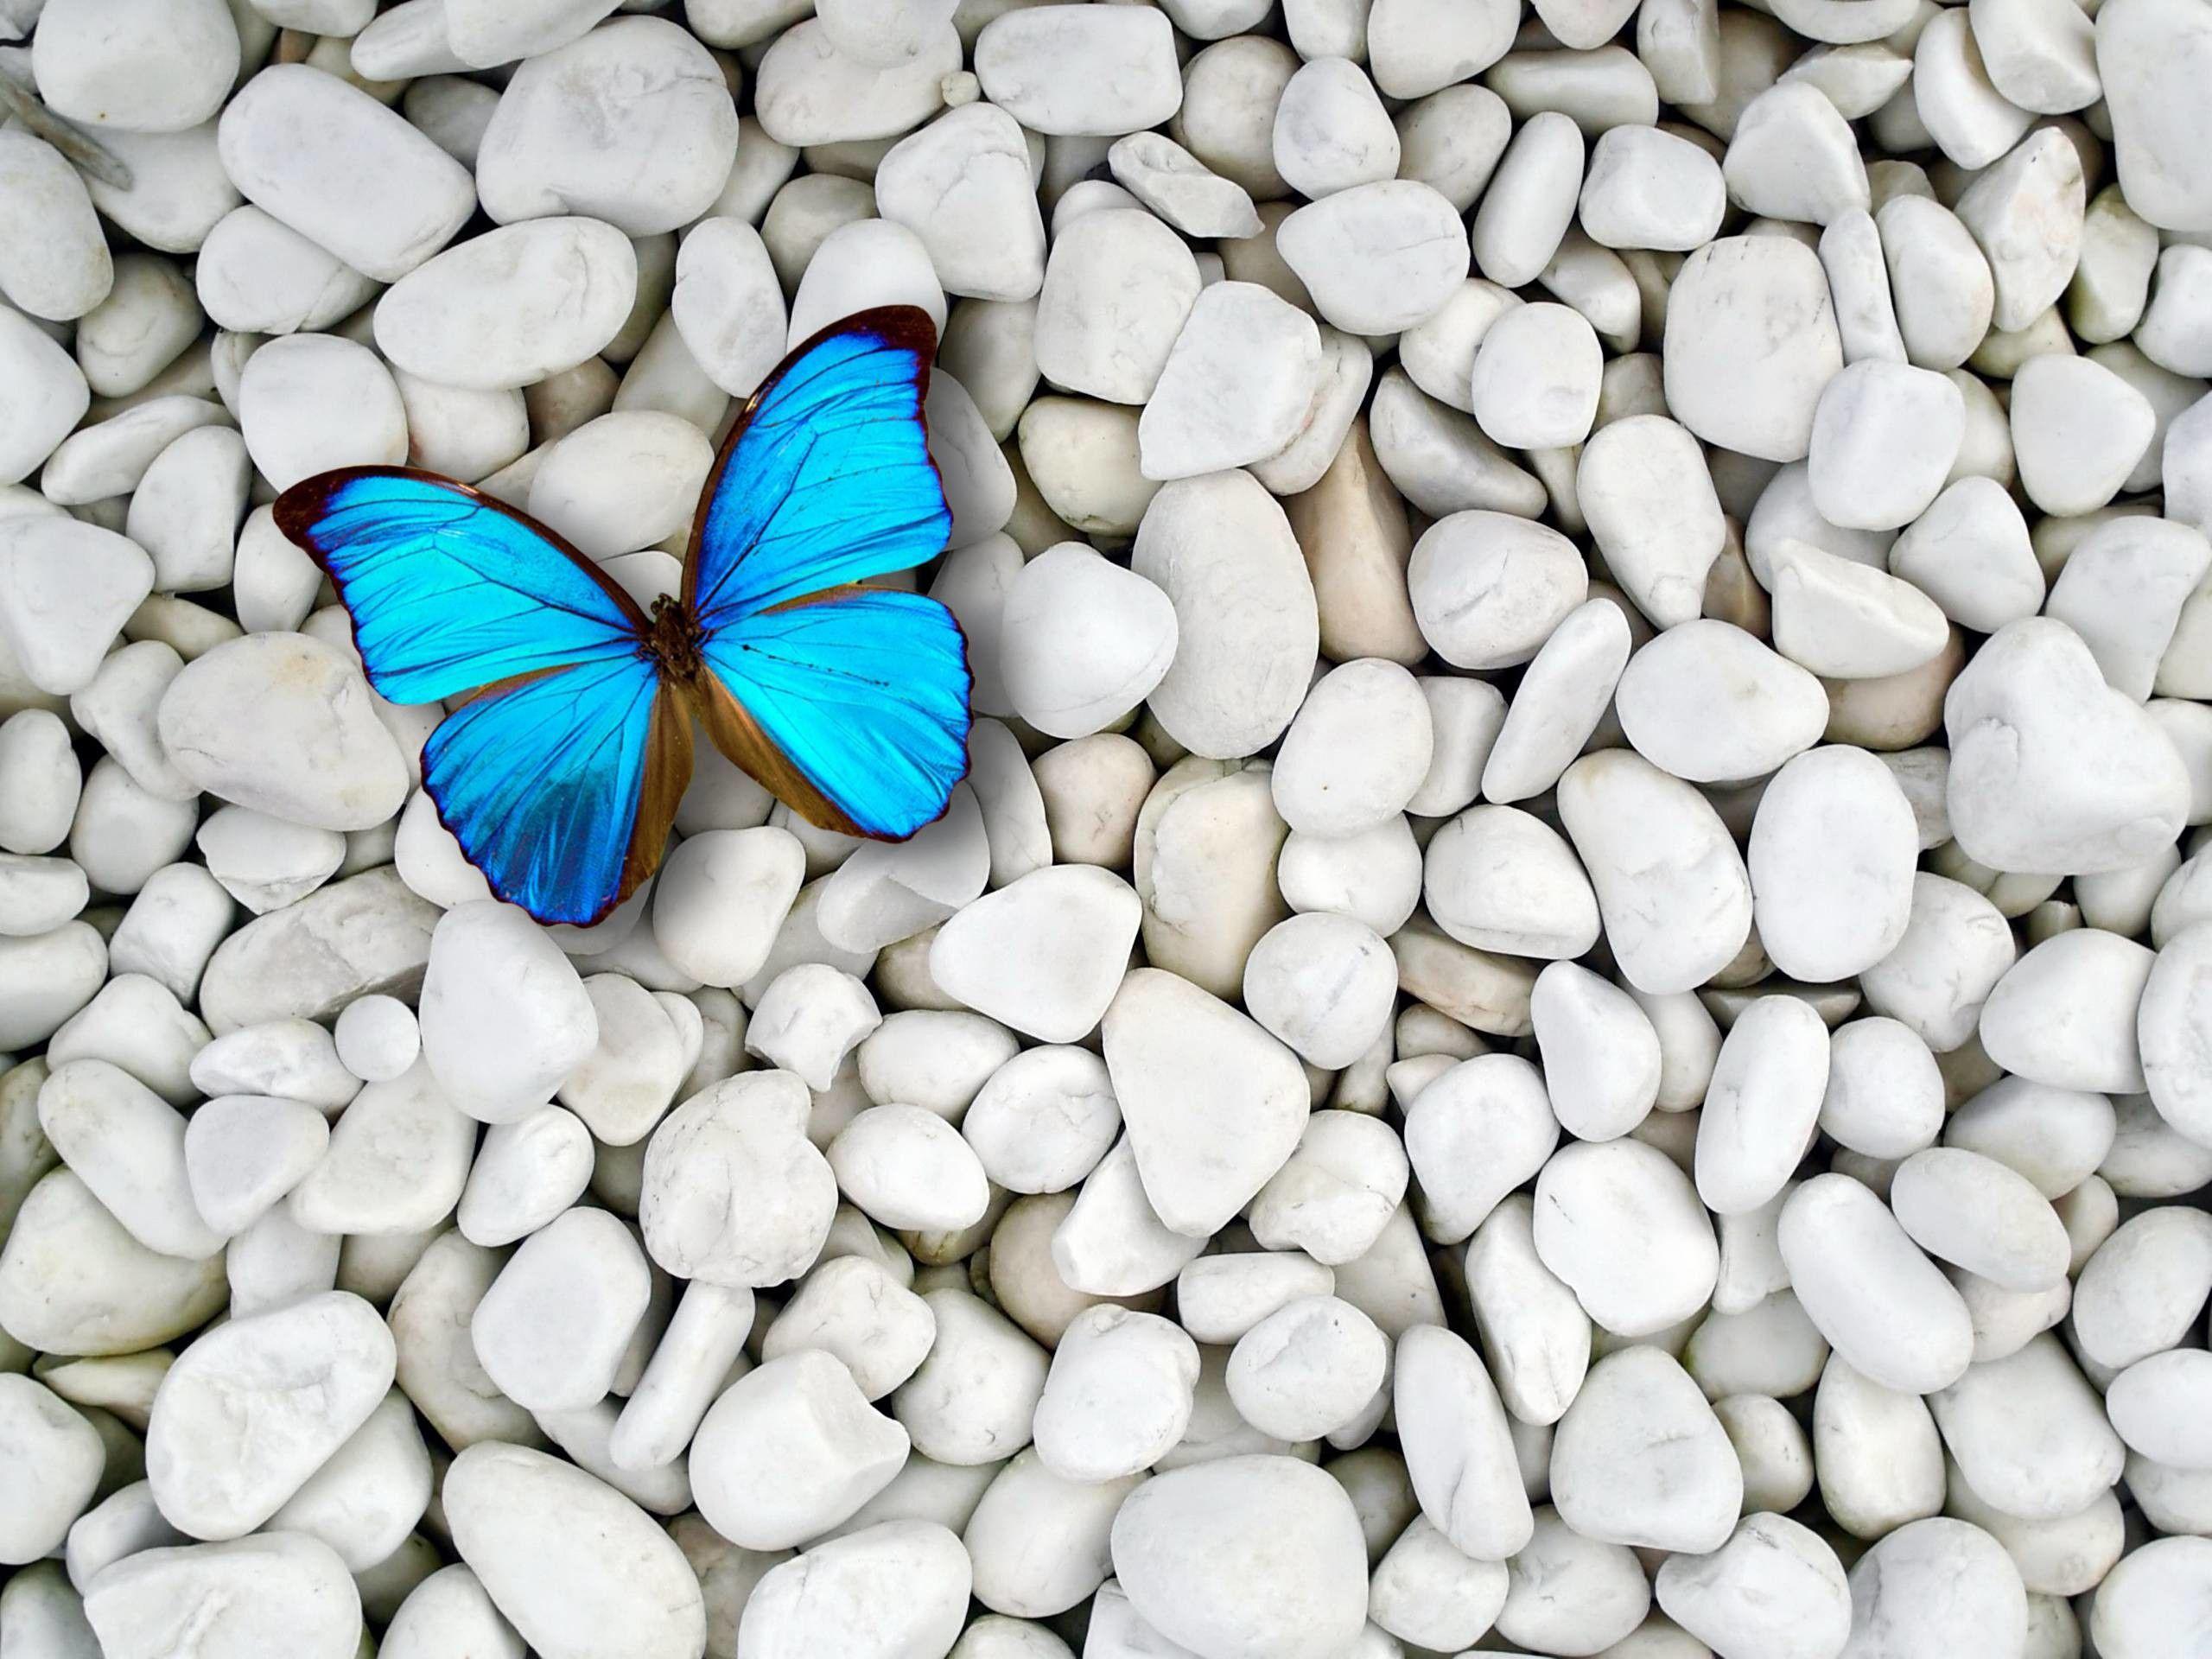 Butterfly Wallpapers - Top Free Butterfly Backgrounds - WallpaperAccess